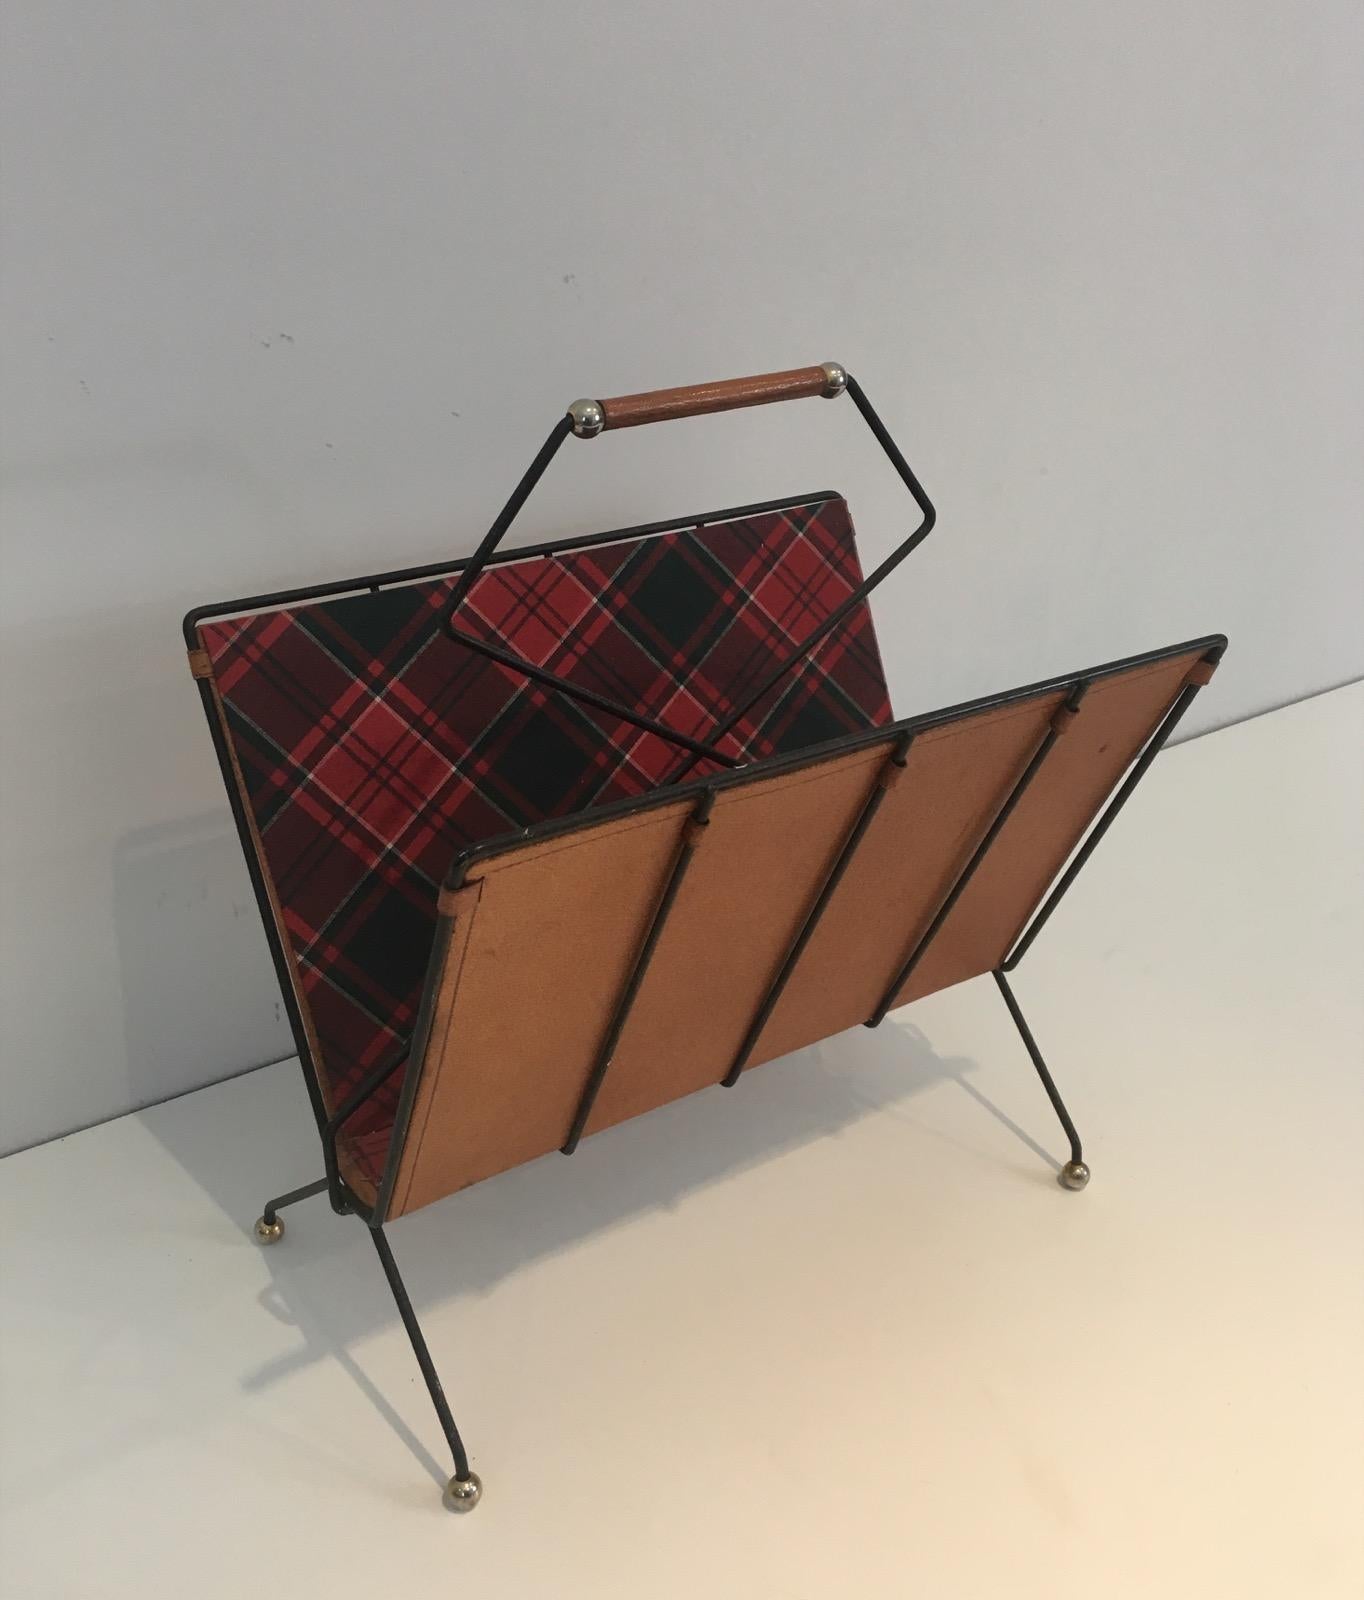 Rare Black Lacquered Metal, Leather and Plaid Fabric Magazine Rack For Sale 6